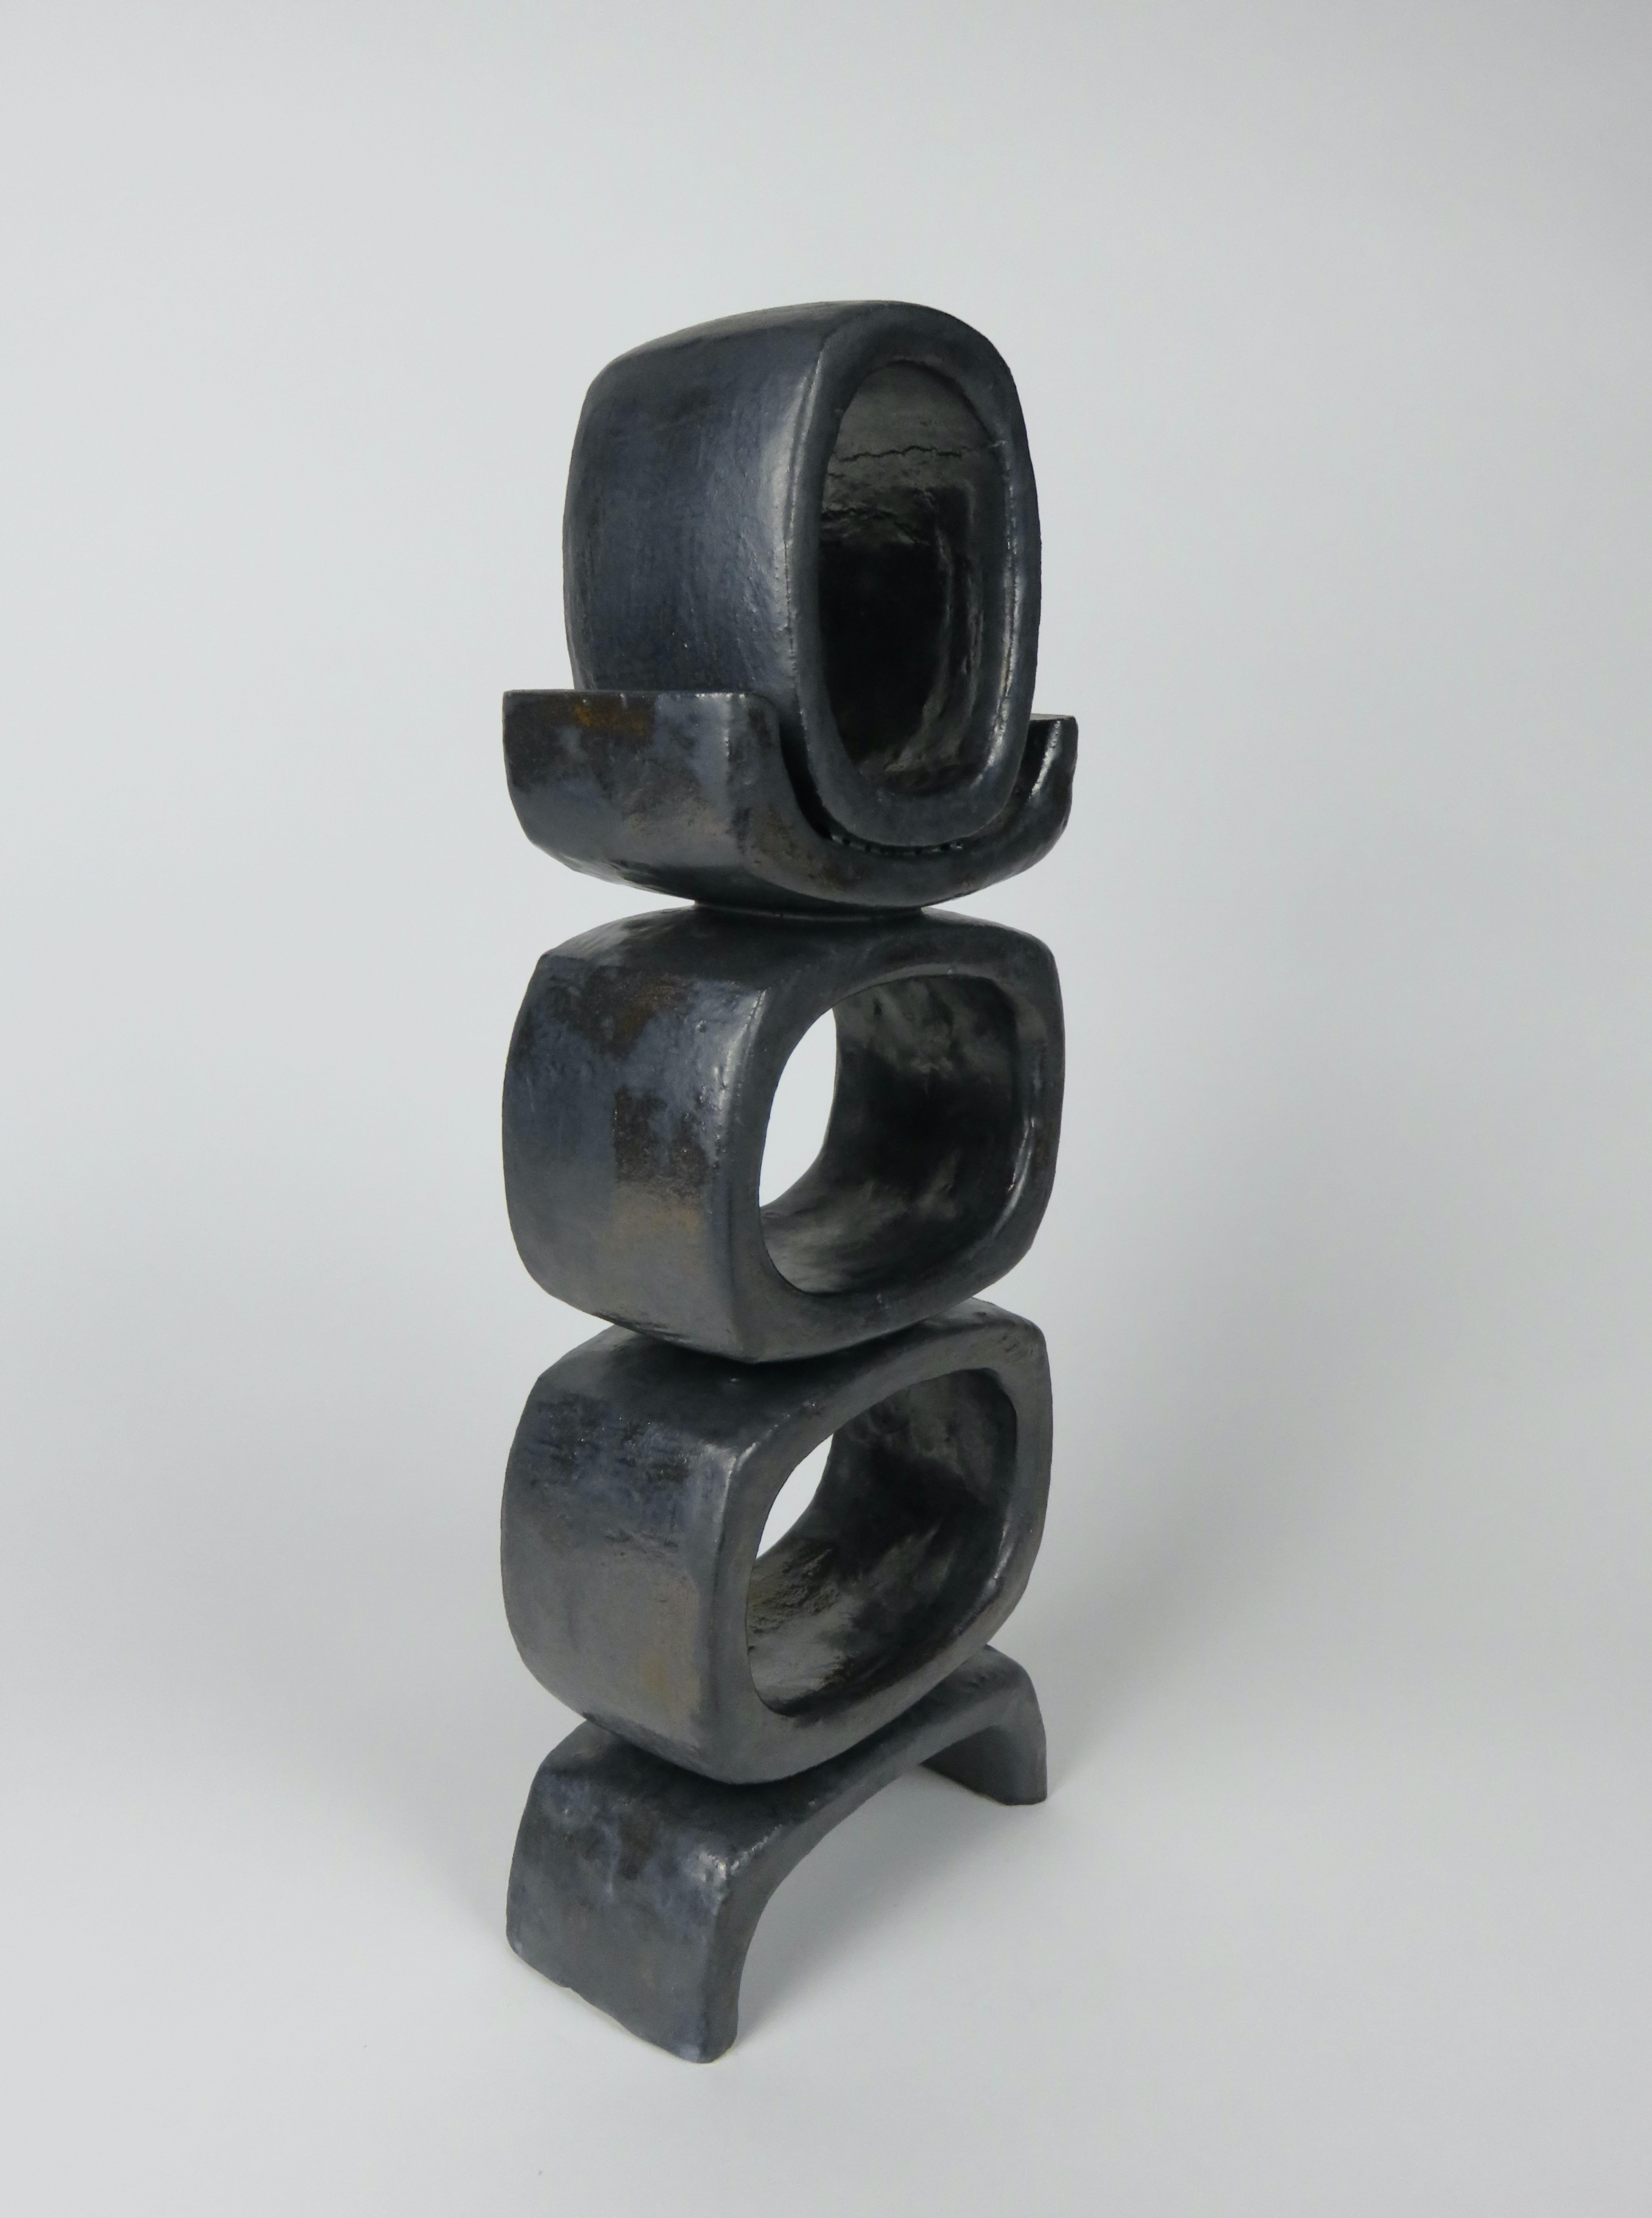 3 Rectangular Ovals on Short Angled Legs, Metallic Black-Glaze Clay Sculpture #2 In New Condition For Sale In New York, NY